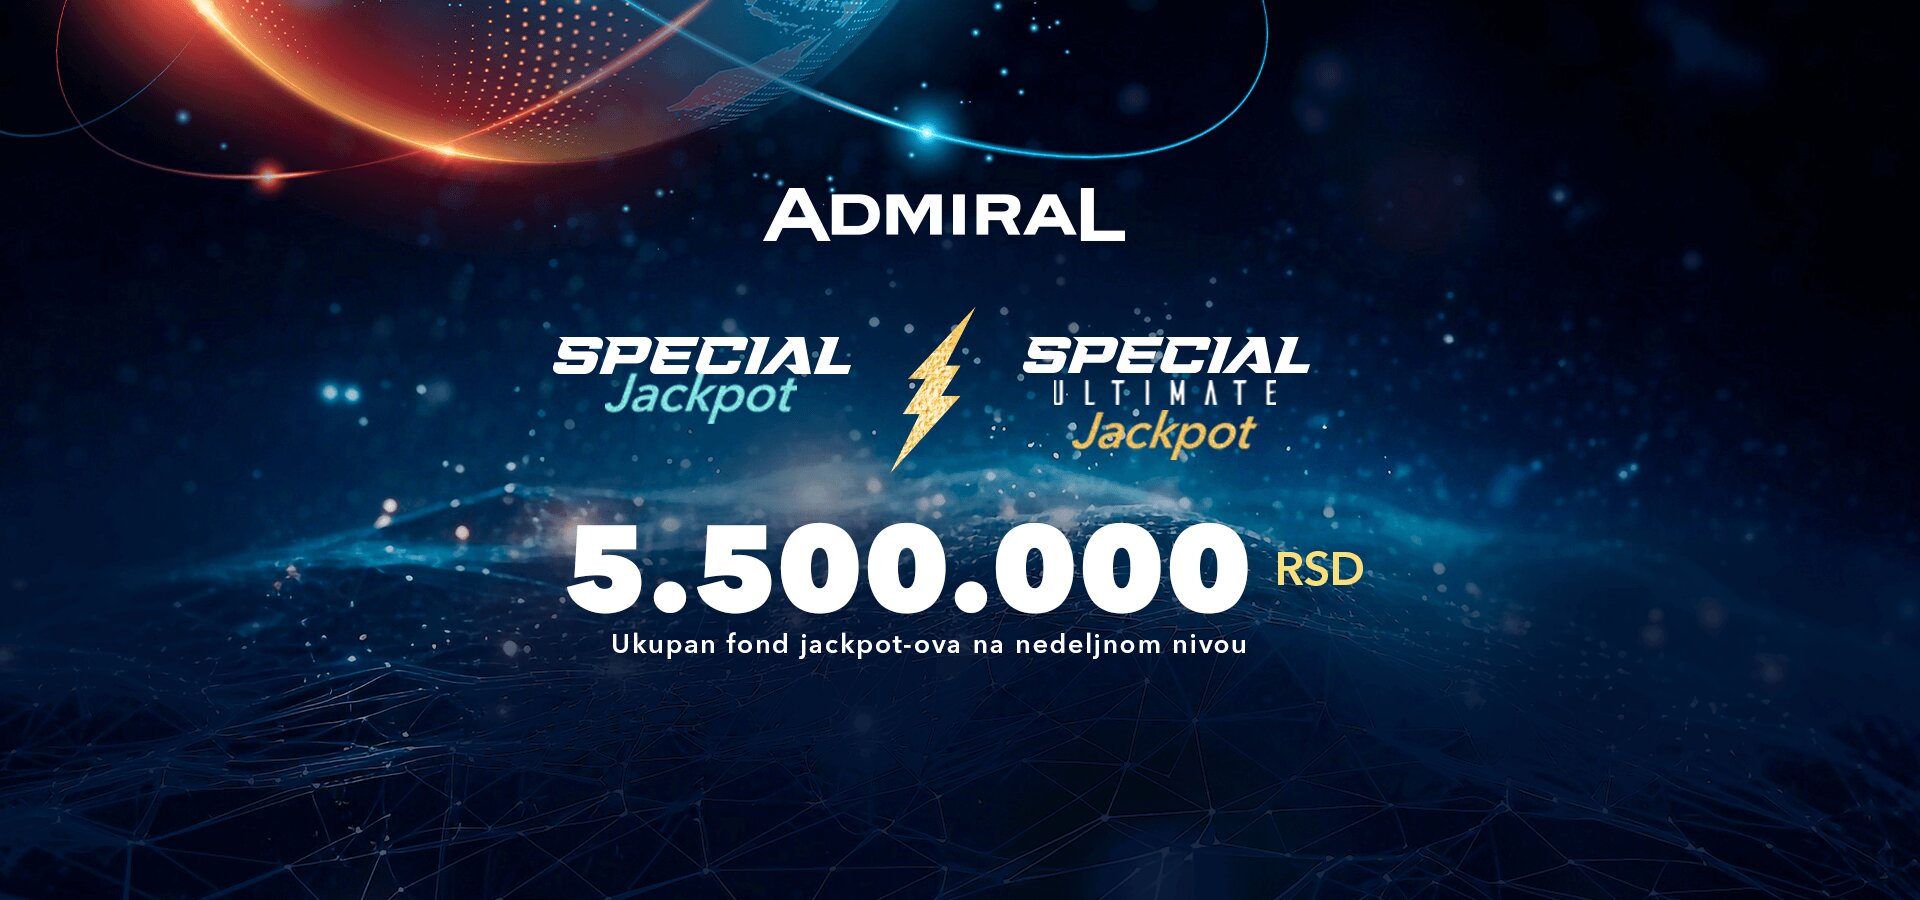 SPECIAL + SPECIAL ULTIMATE JACKPOT